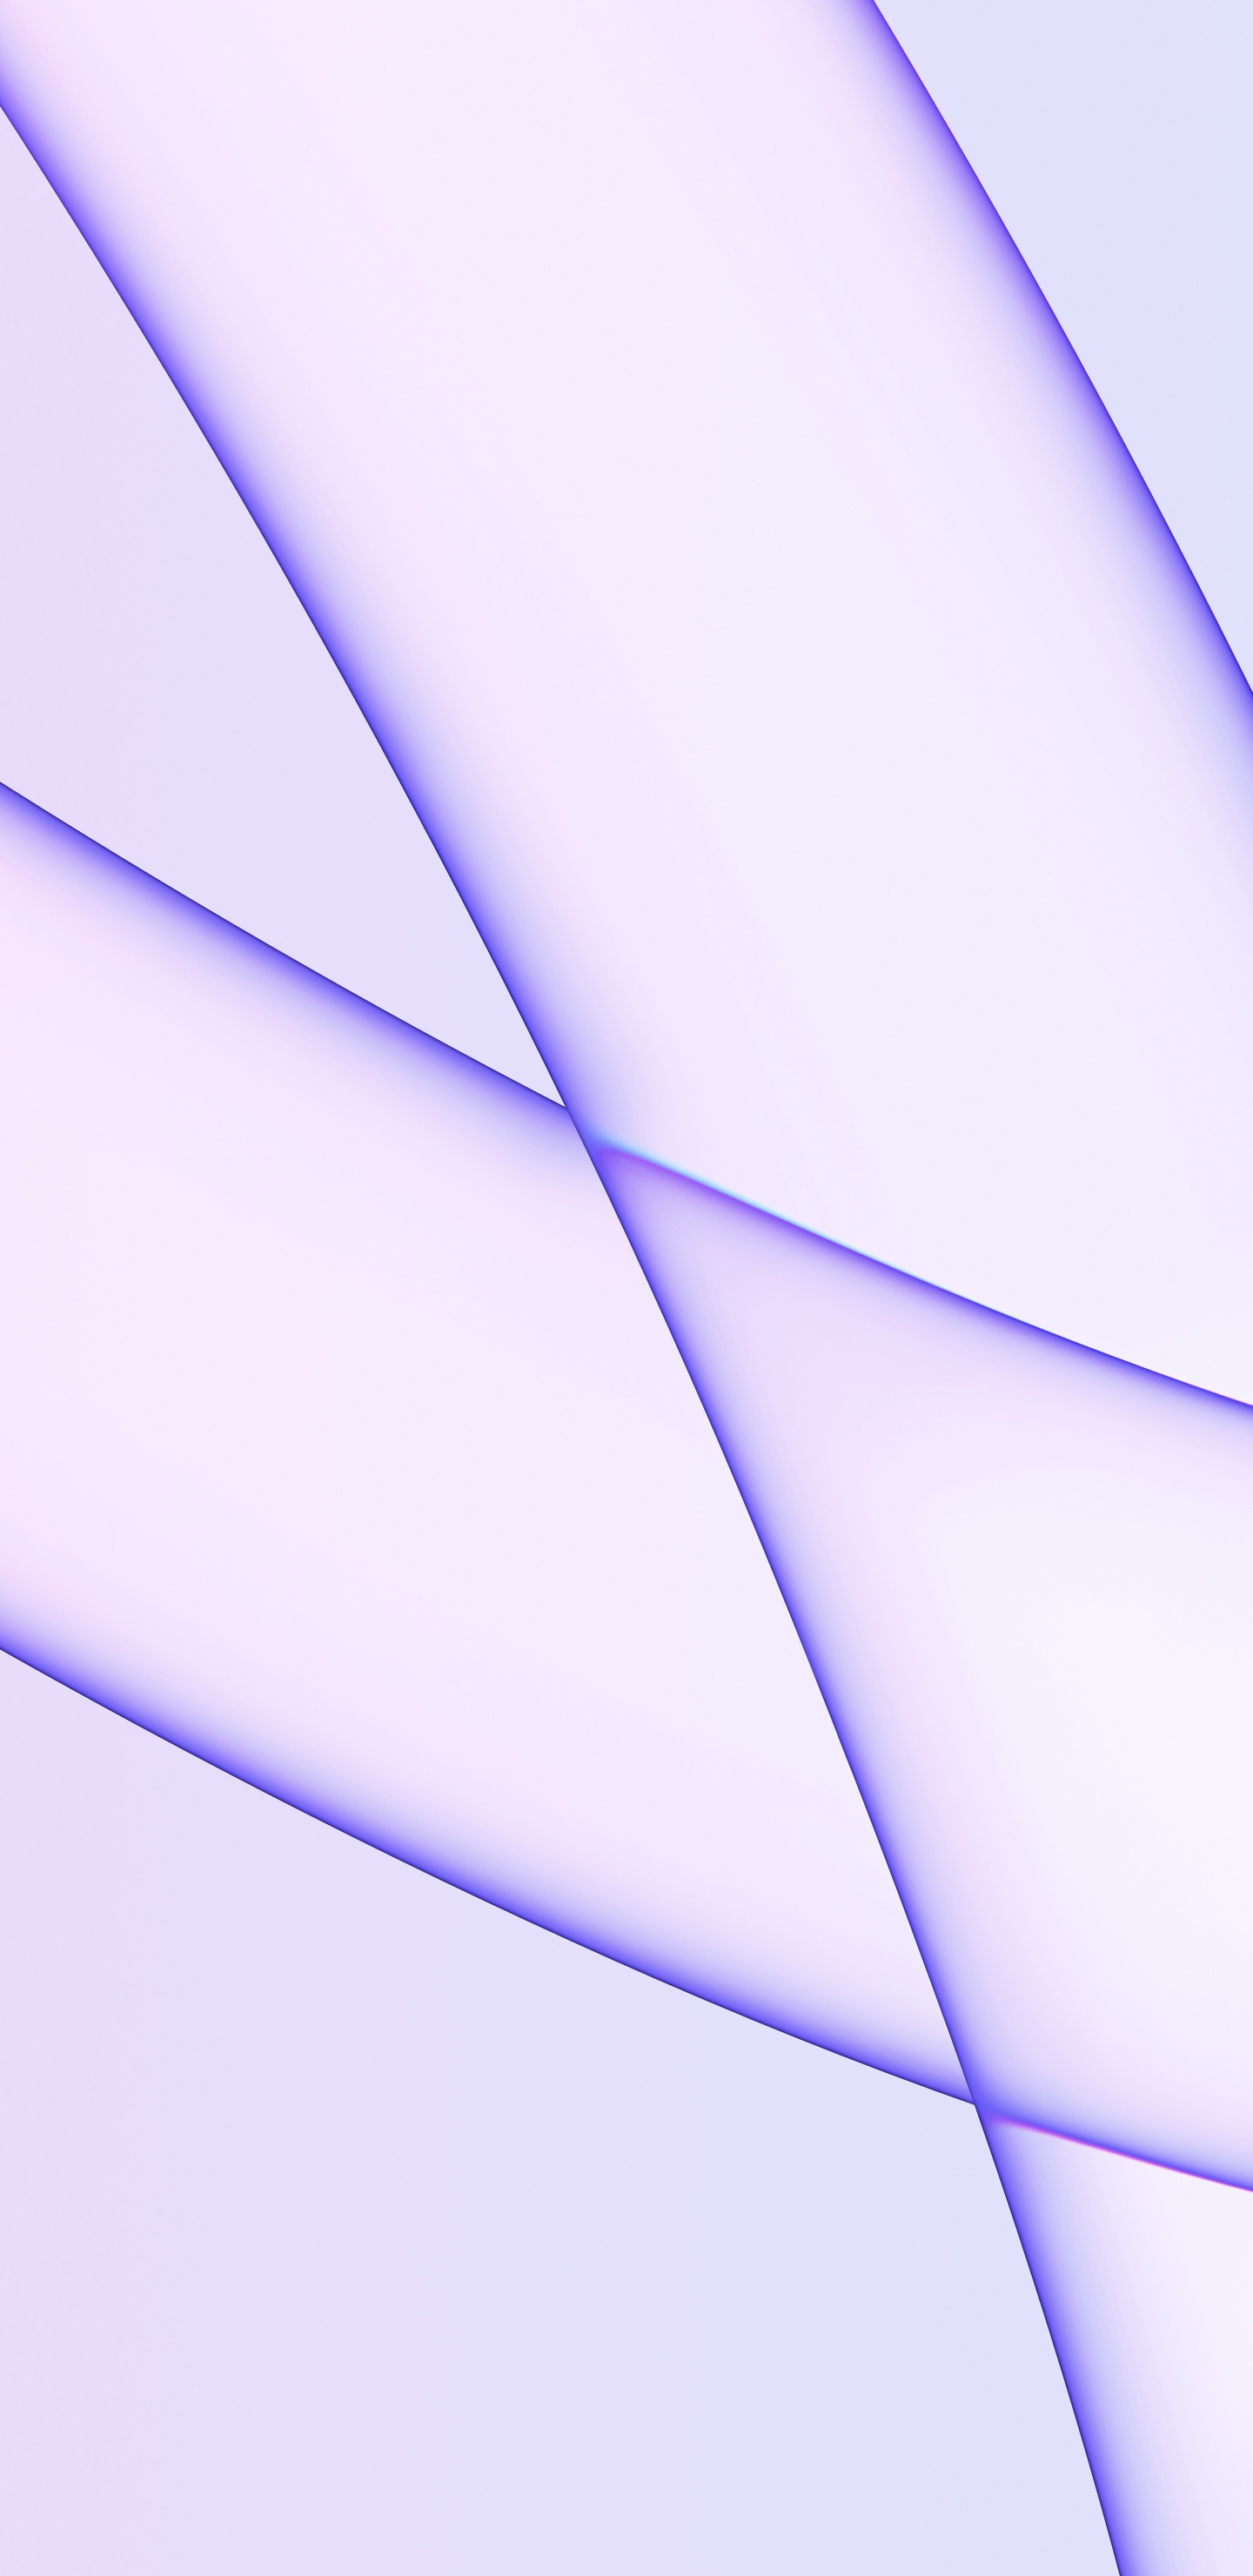 IMac Color Matching Wallpaper in Light Purple for IPad or Desktop. Wallpaper in 1440x2960 Resolution